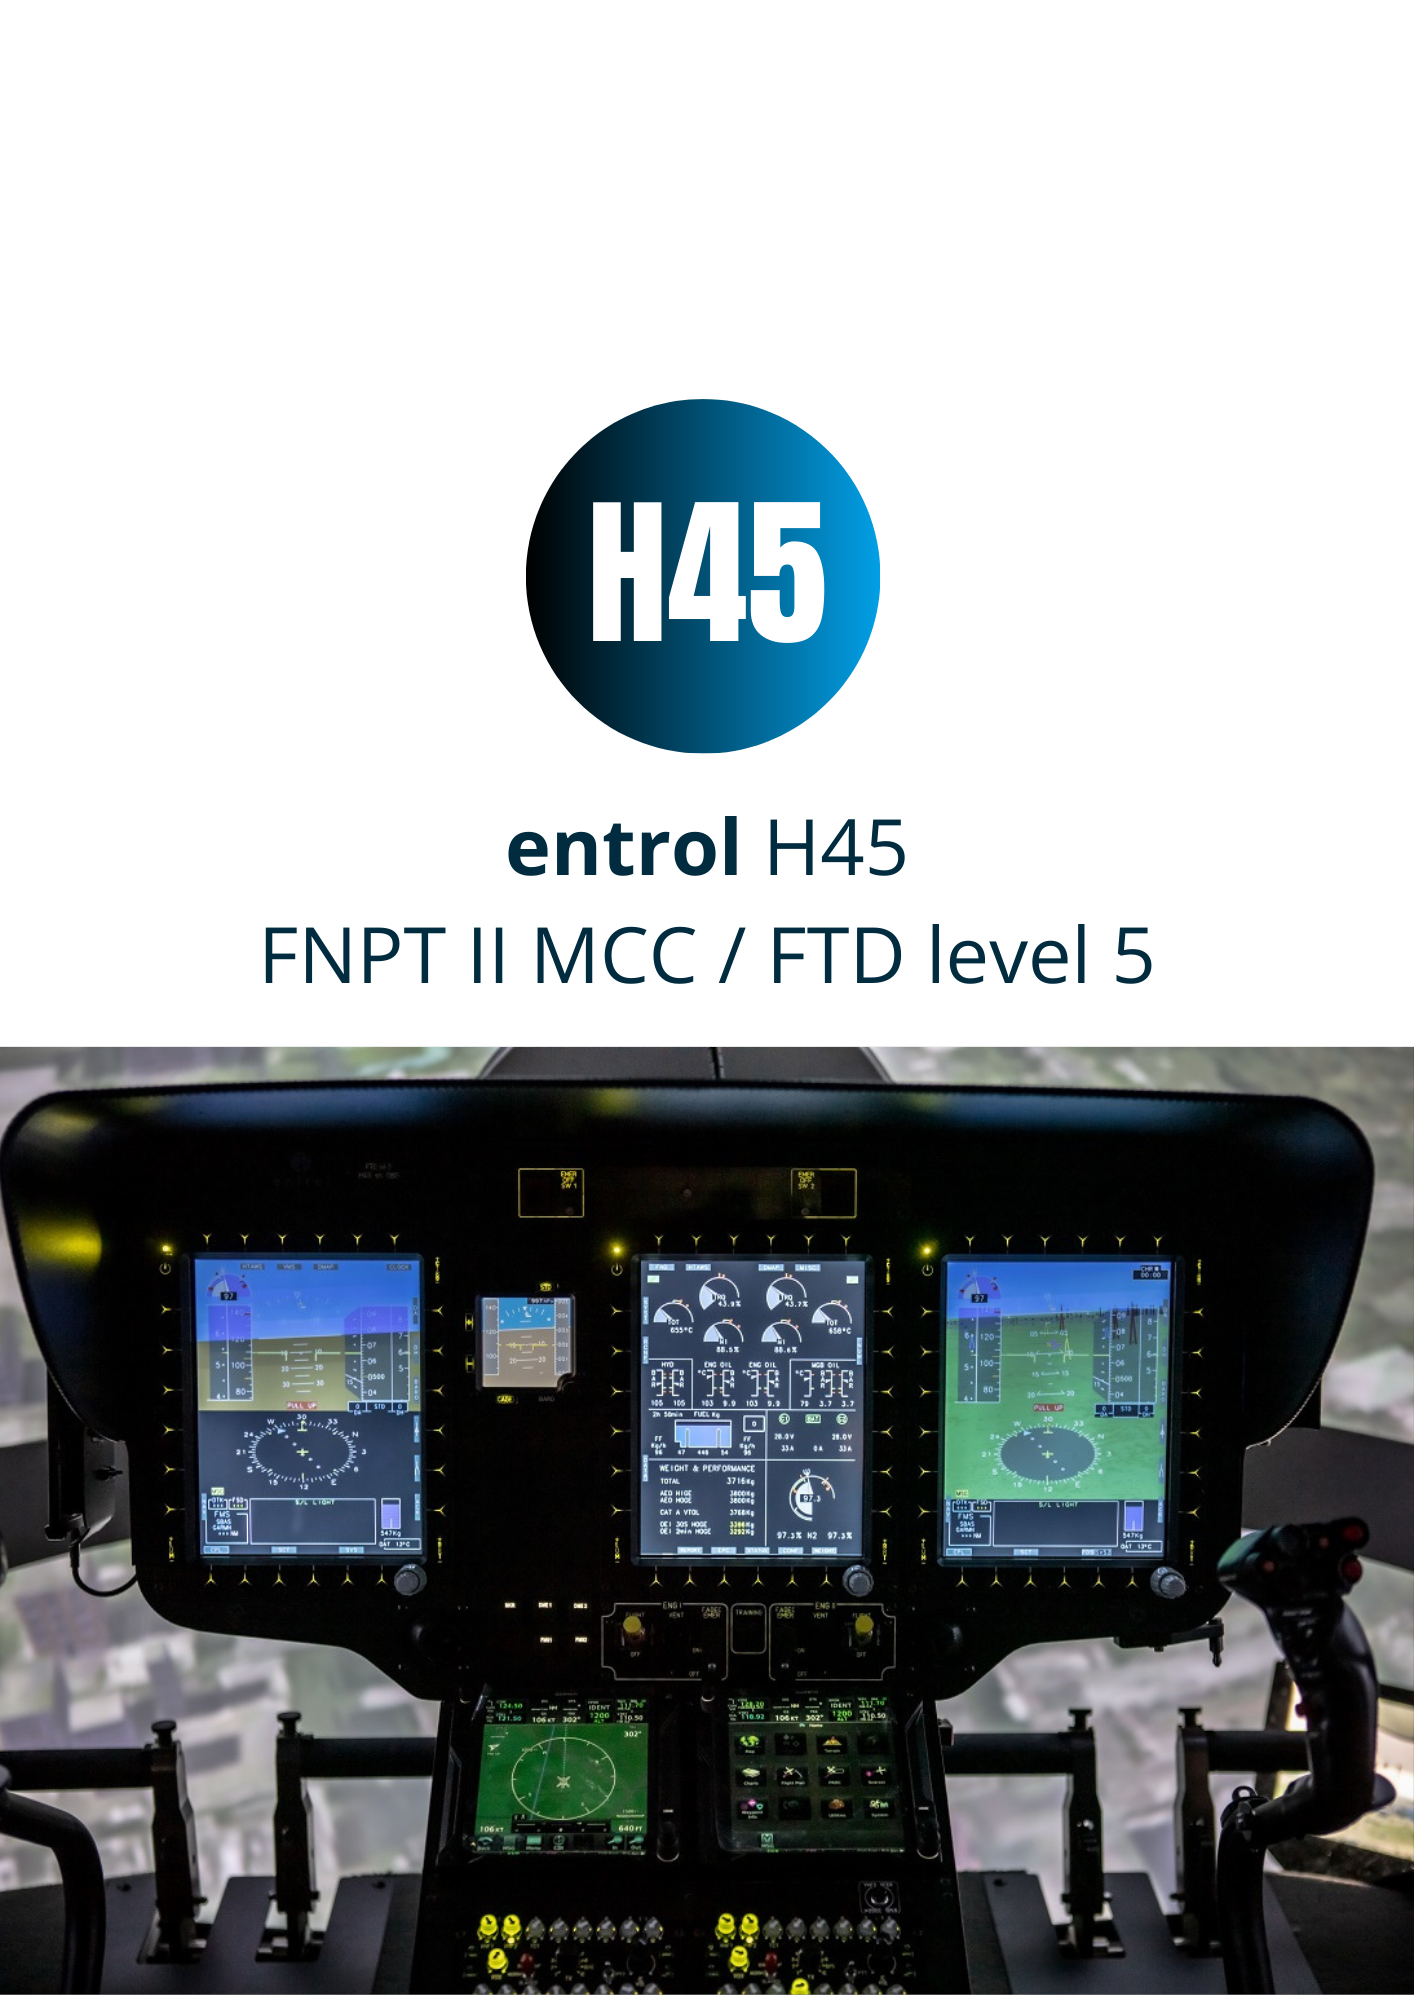 Helicopters Otago NZ has purchased a H45 FNPT II MCC simulator to entrol